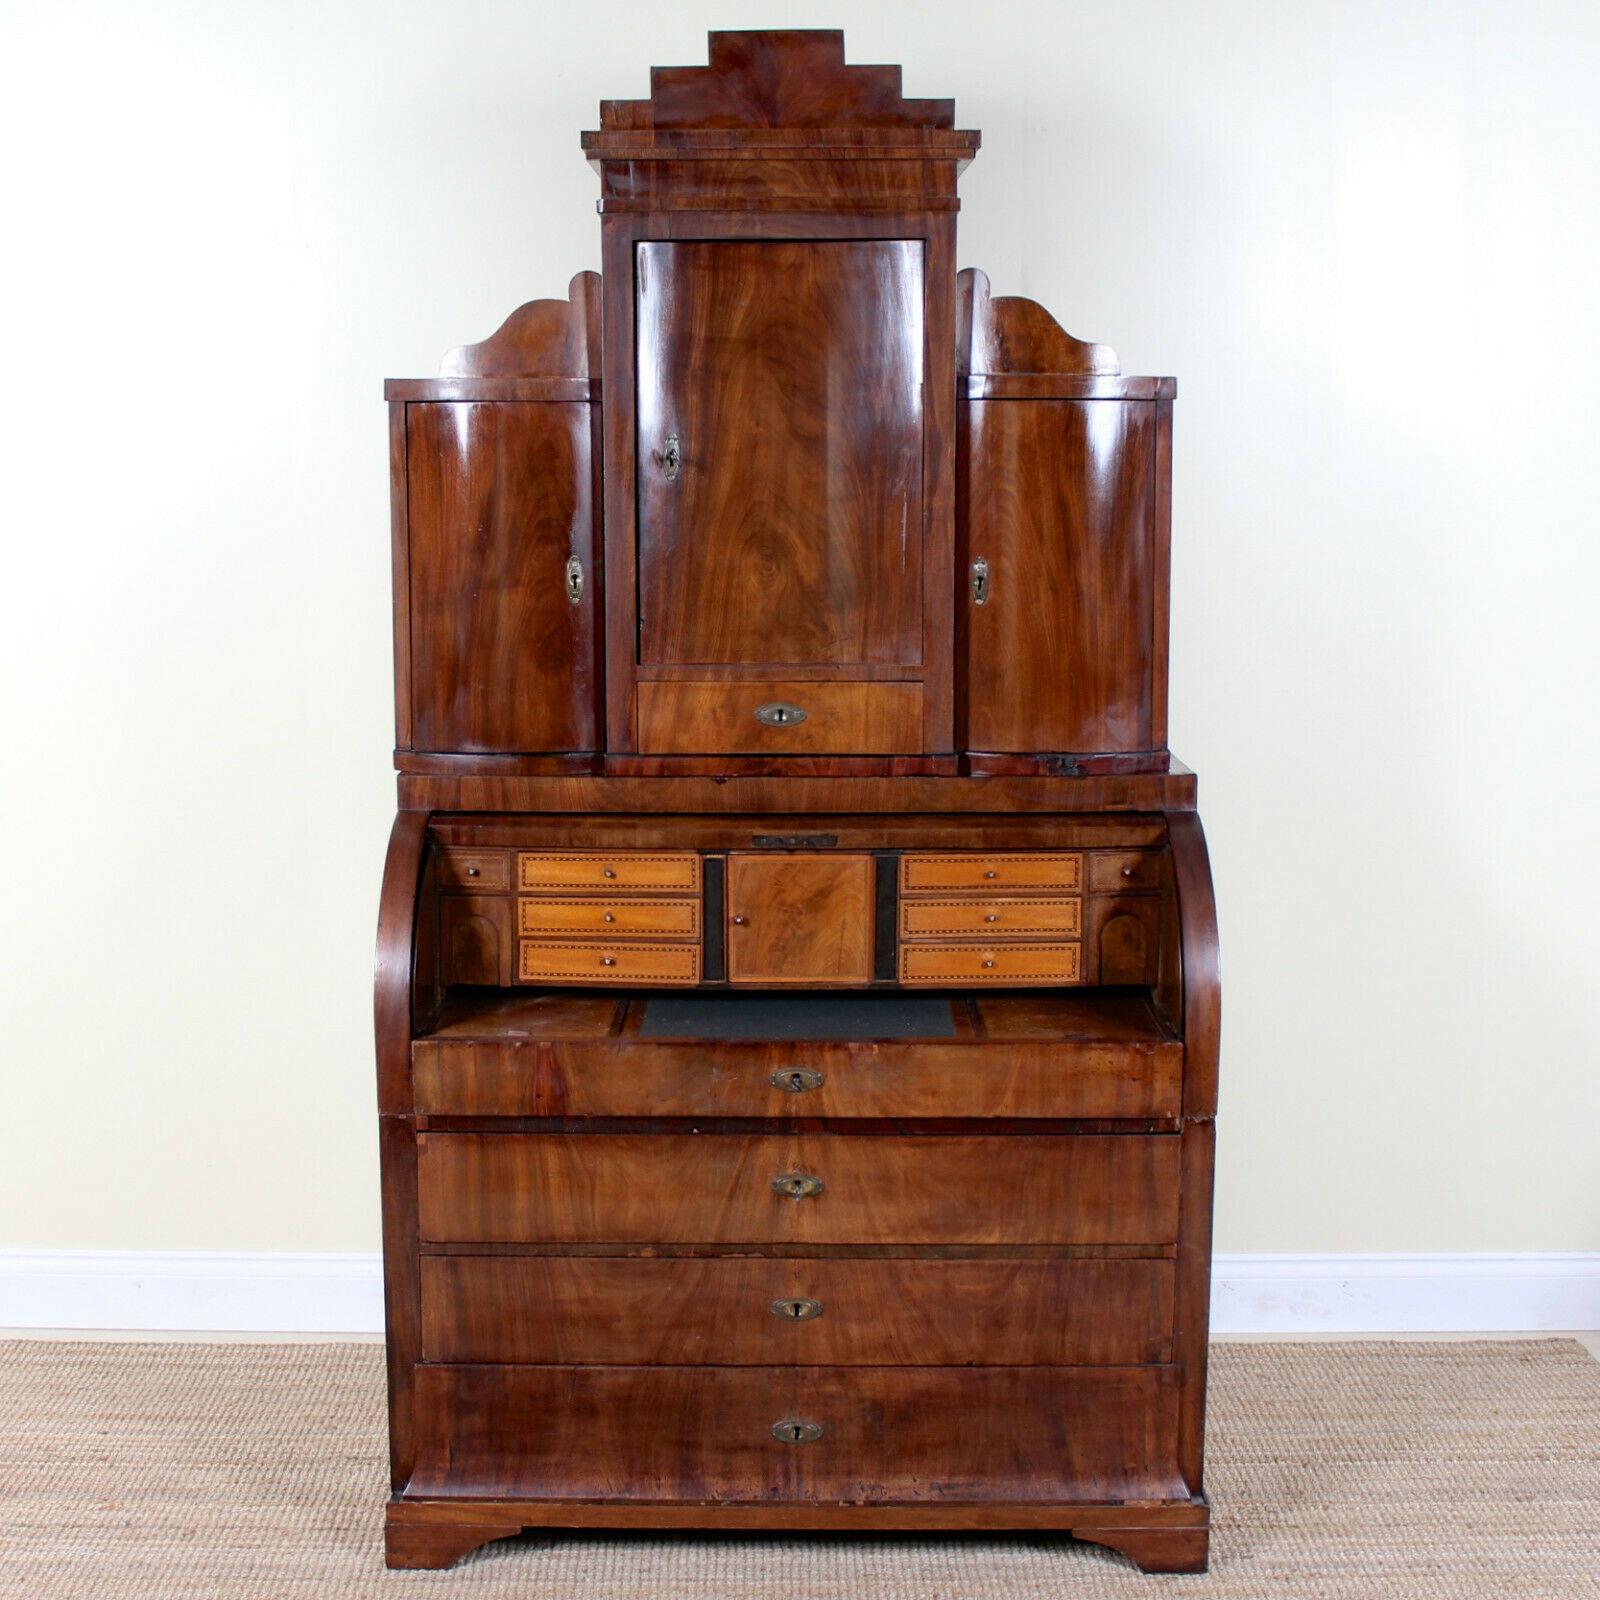 A rare and impressive large 19th century Swedish flamed mahogany secretaire in the Biedermeier manner.
The upper section with a three concave and convex shaped doors enclosed shelving and drawers.
The lower section fall flap enclosed a fitted